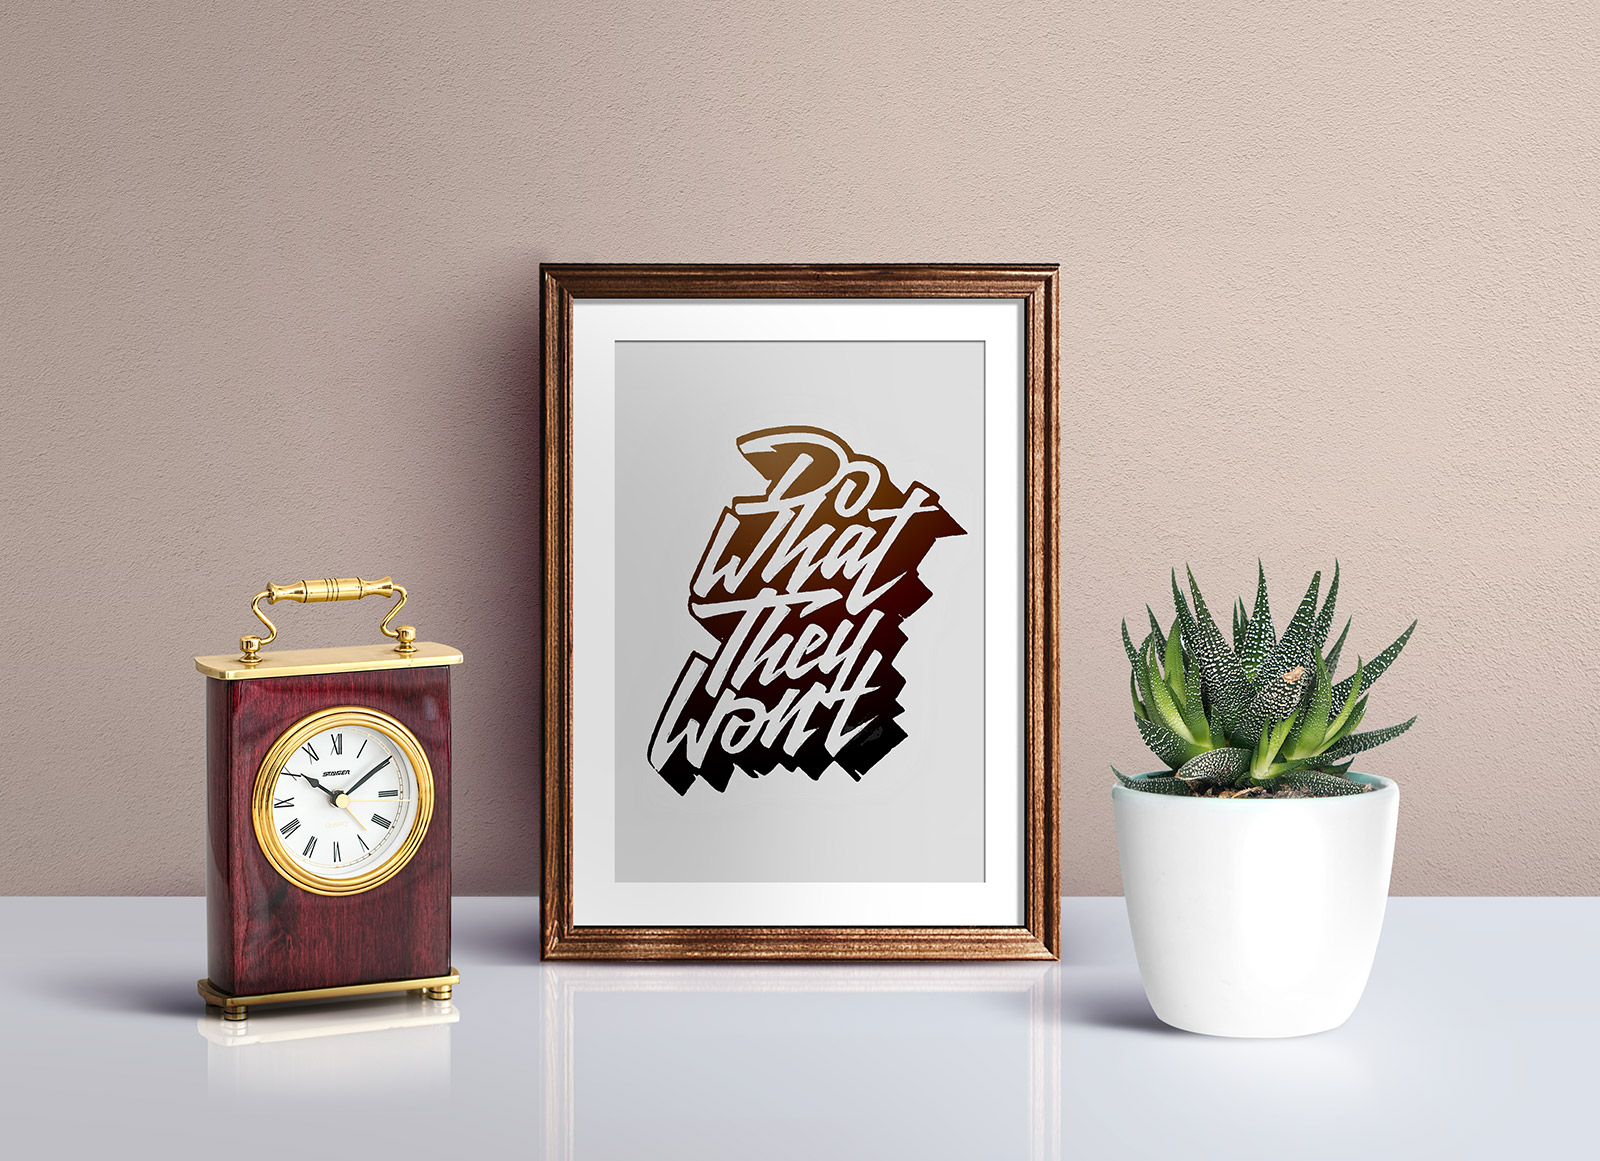 Free-Picture-Frame-Mockup-PSD-For-Typography-&-Illustration